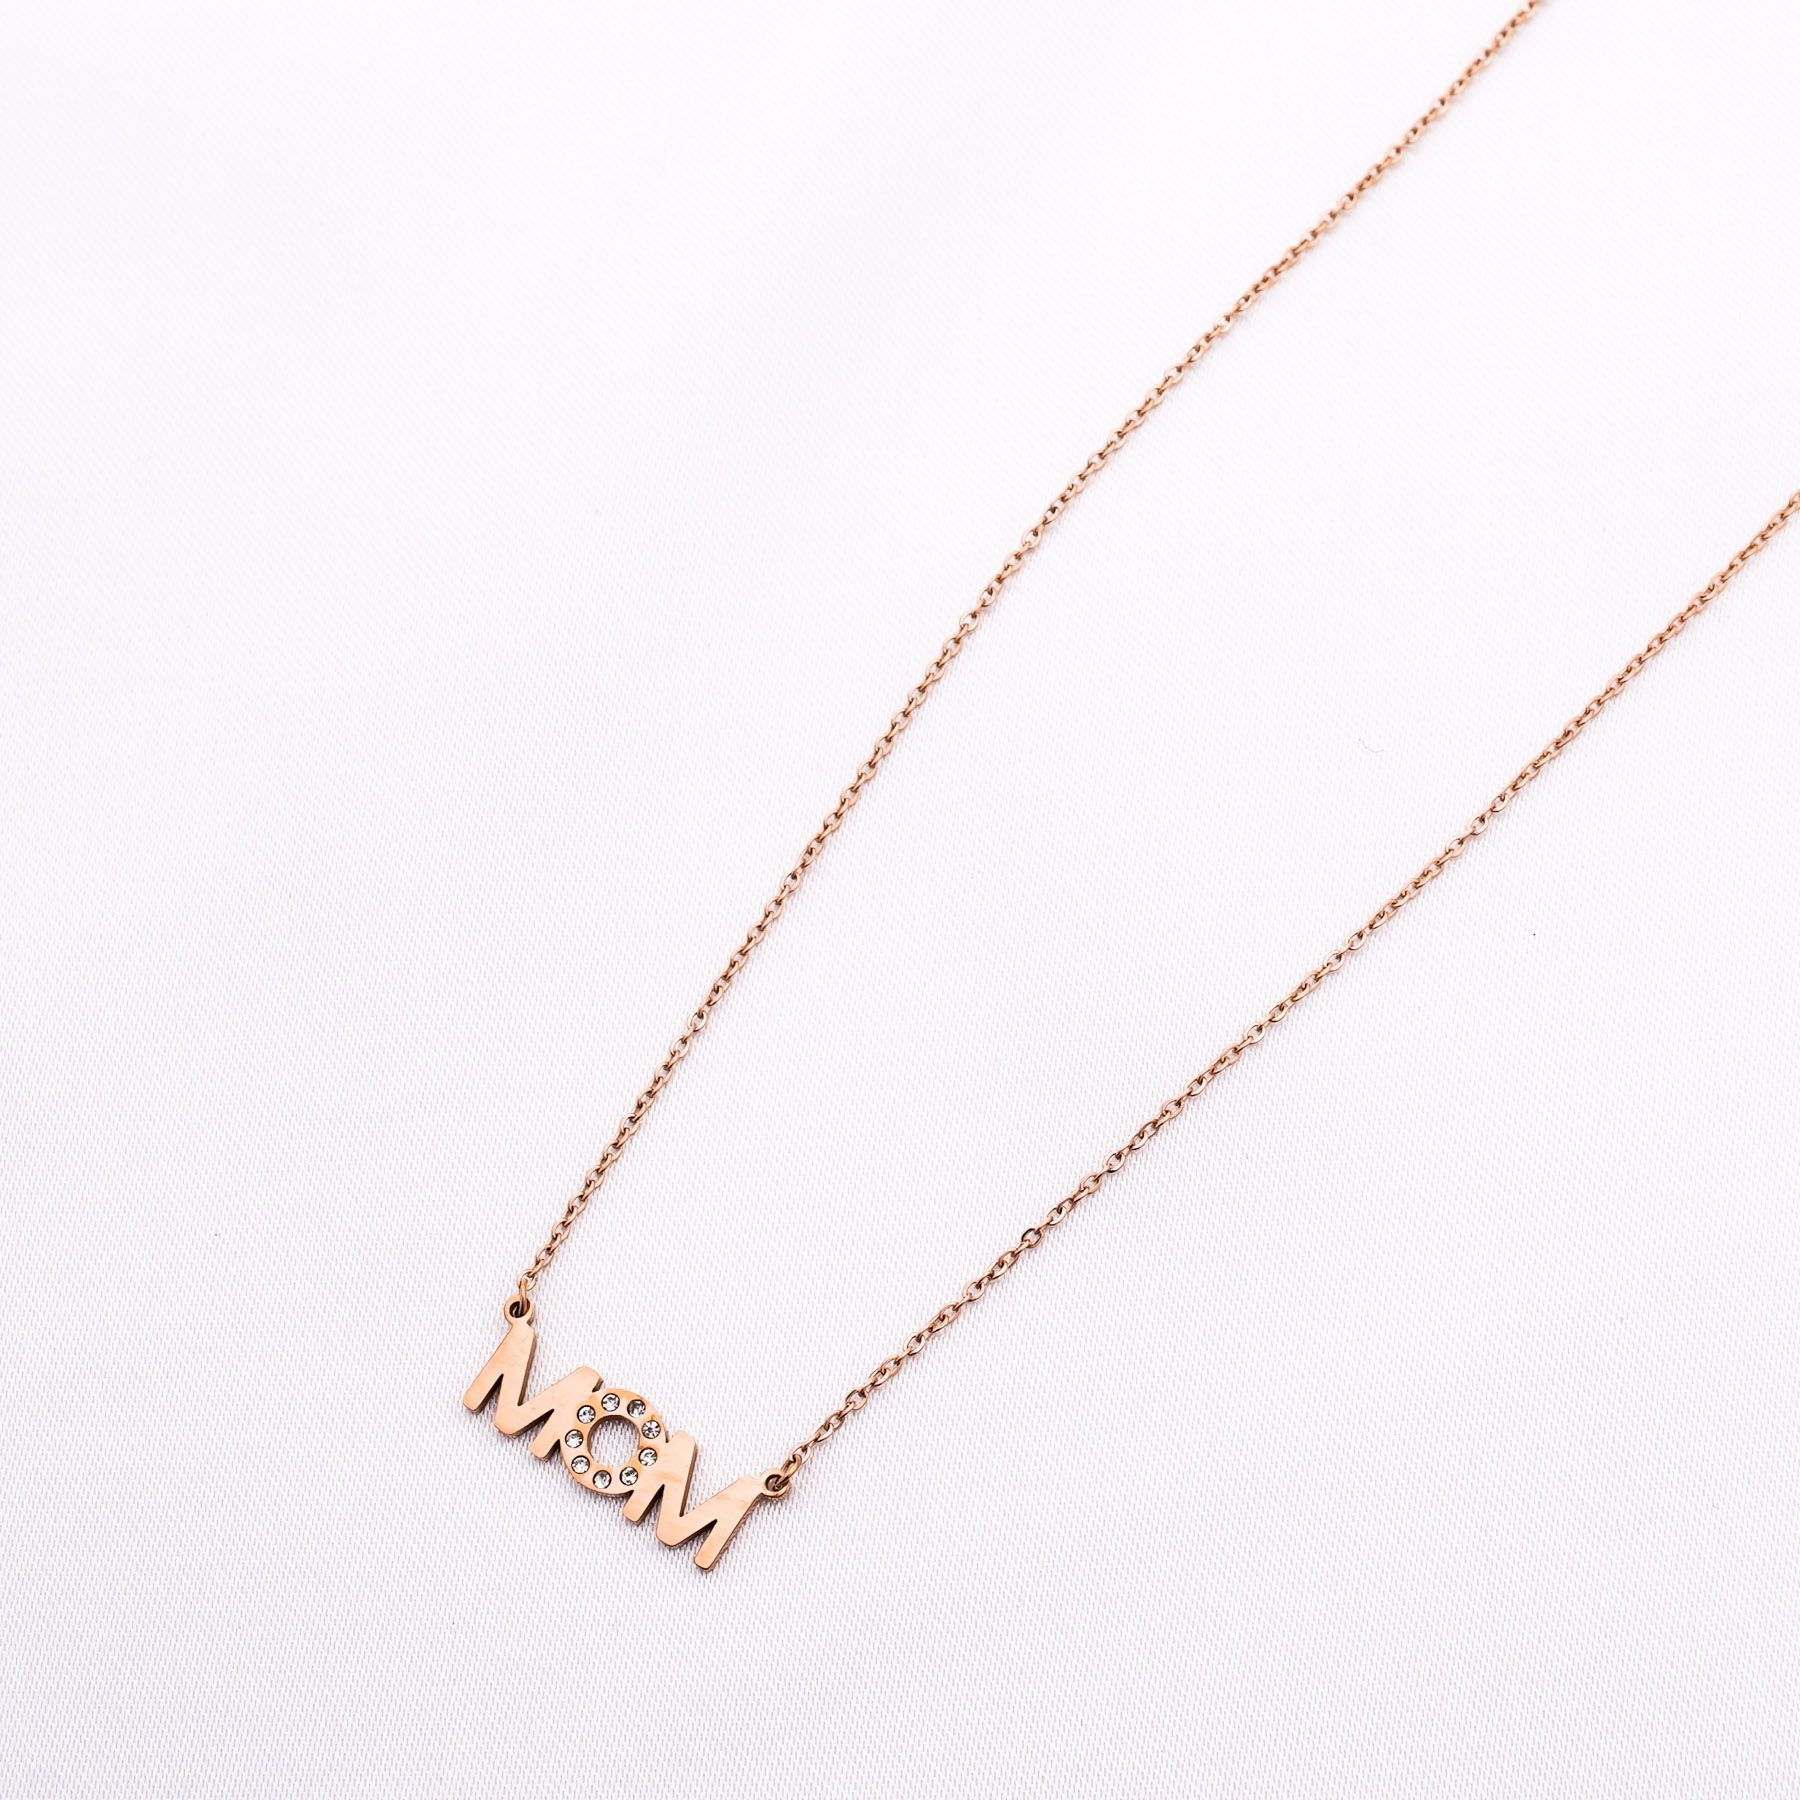 MOM NECKLACE - ROSE GOLD ' - ' ΜΑΜΑ - ΝΟΝΑ